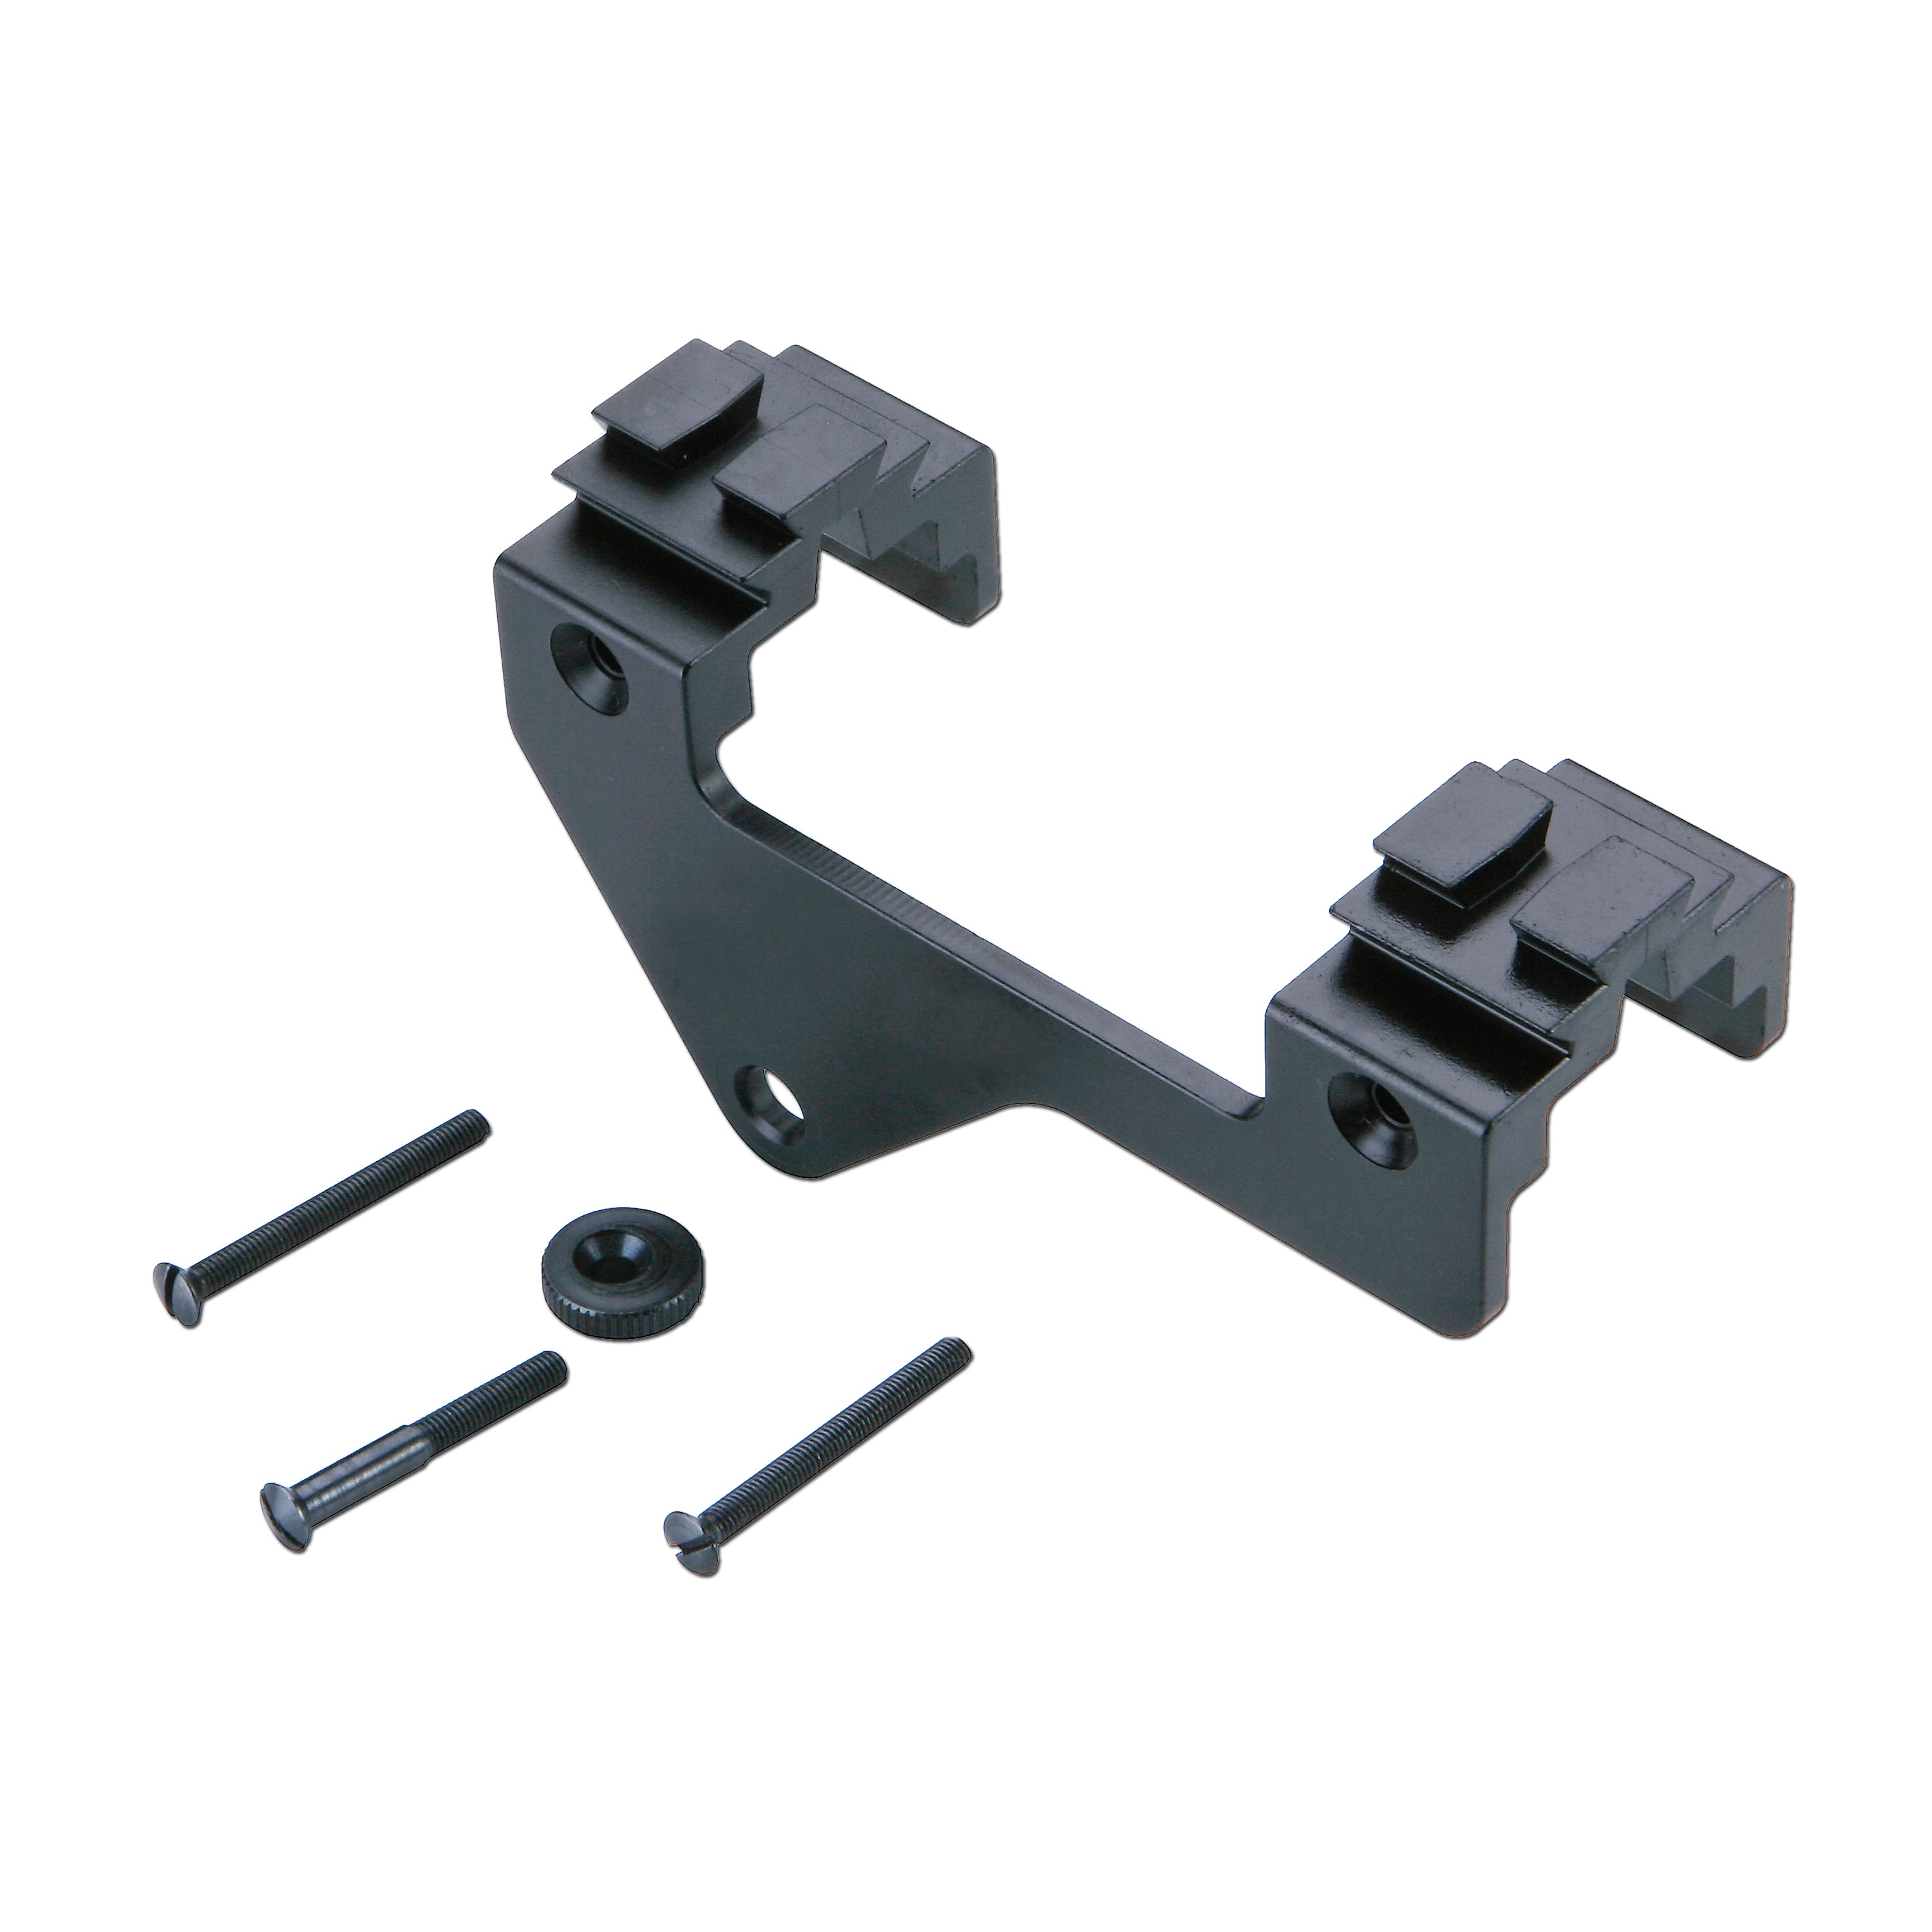 SCOPE MOUNT 22 MM RAIL FOR UMAREX WALTHER LEVER ACTION AIR RIFLE 